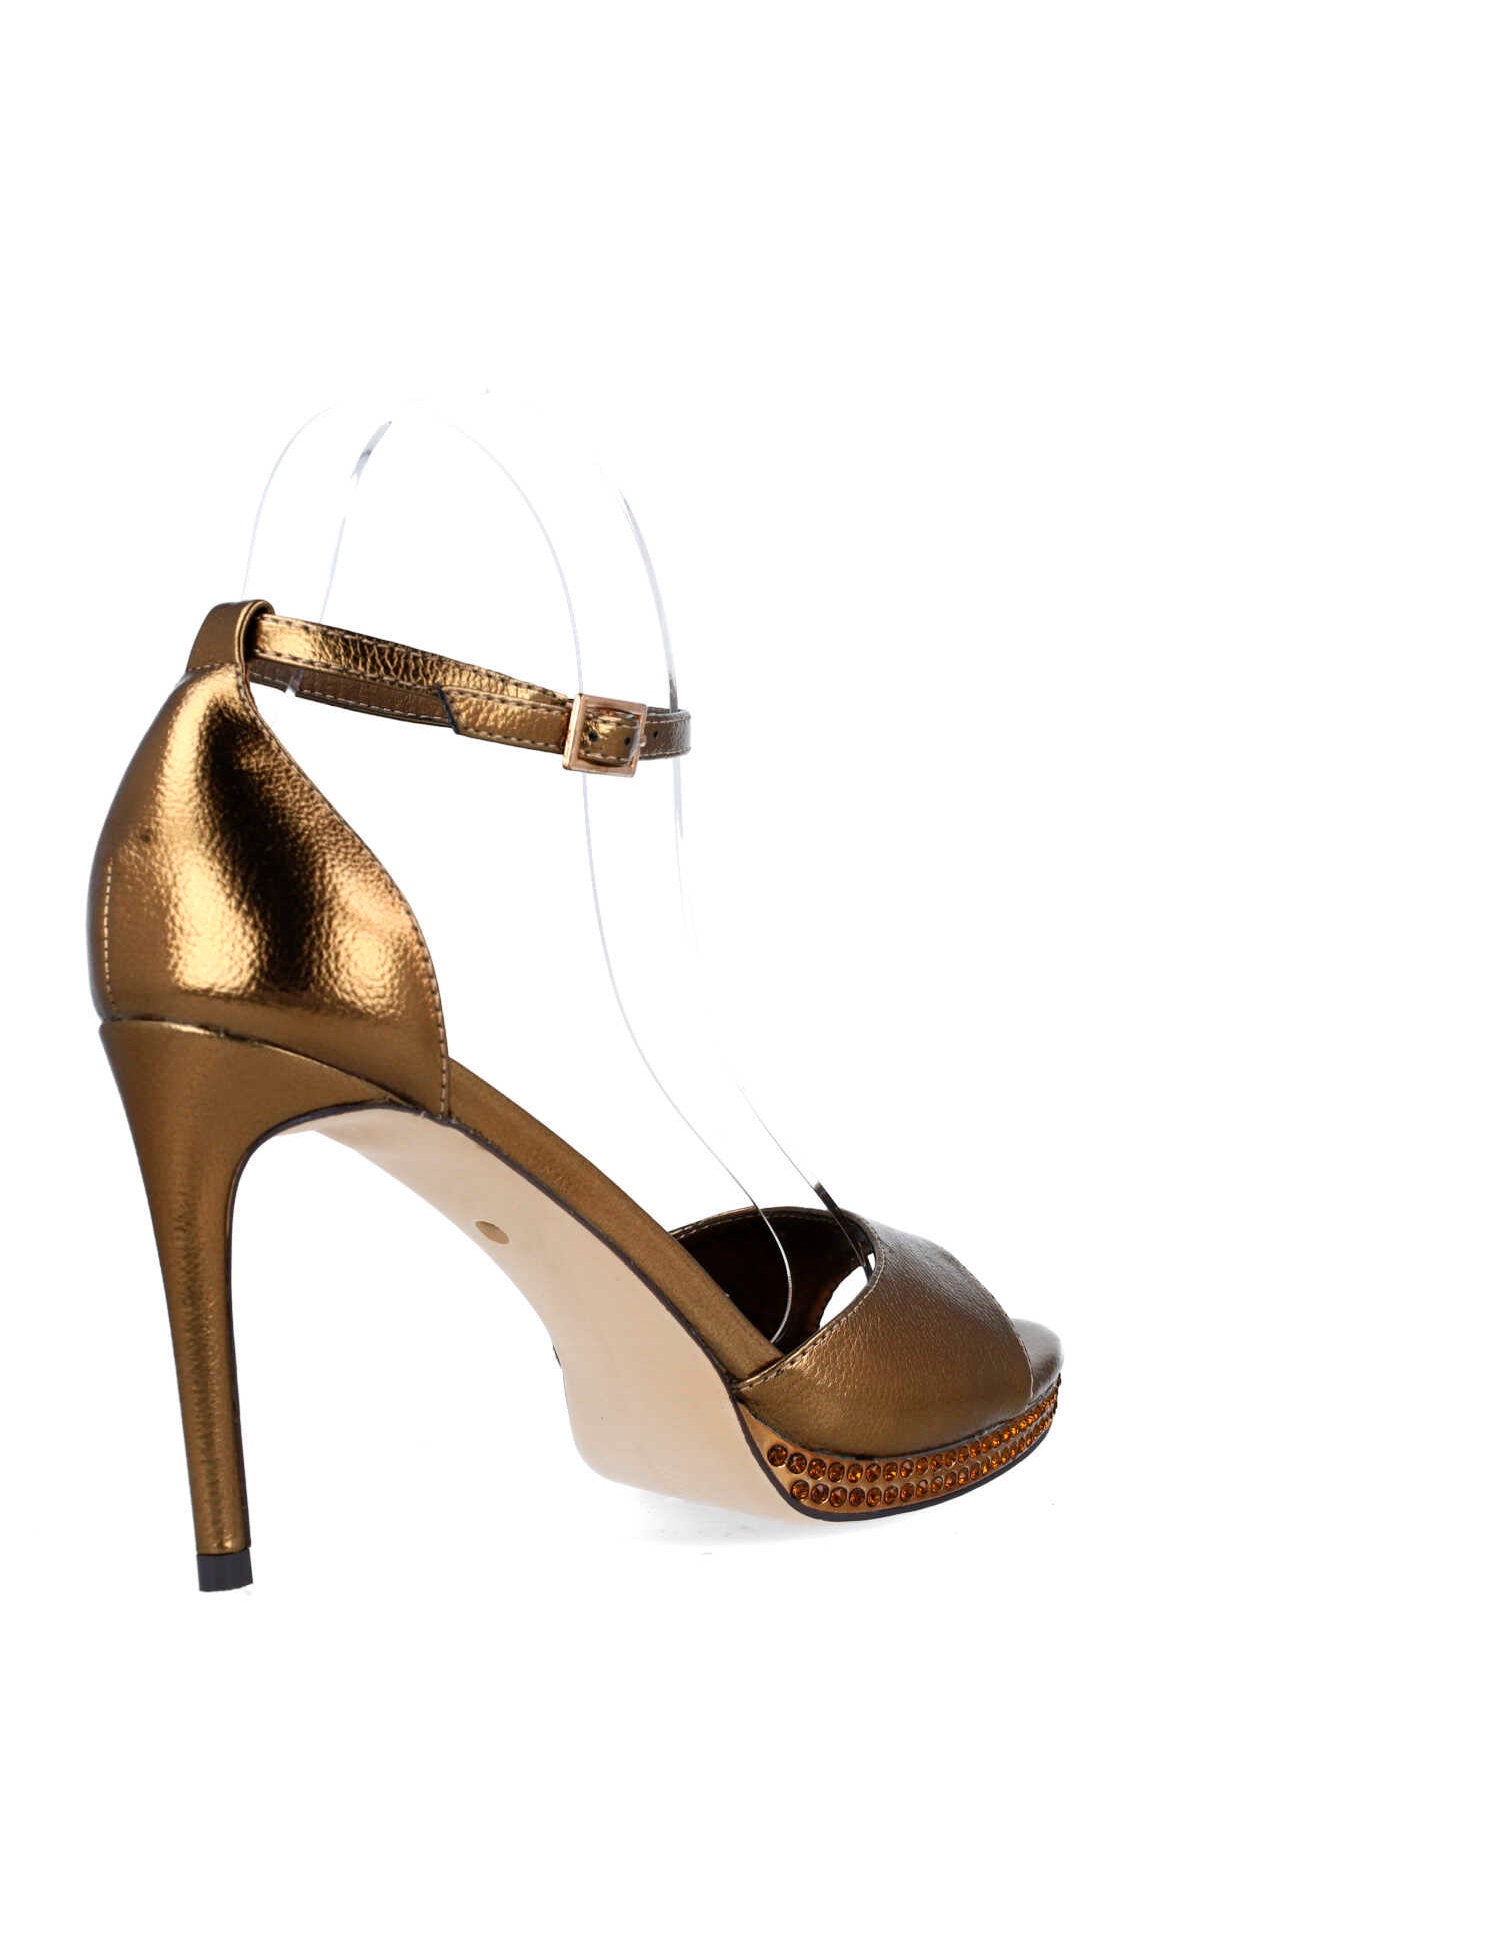 Shiny Brown High-Heel Sandals With Ankle Strap_25157_95_03